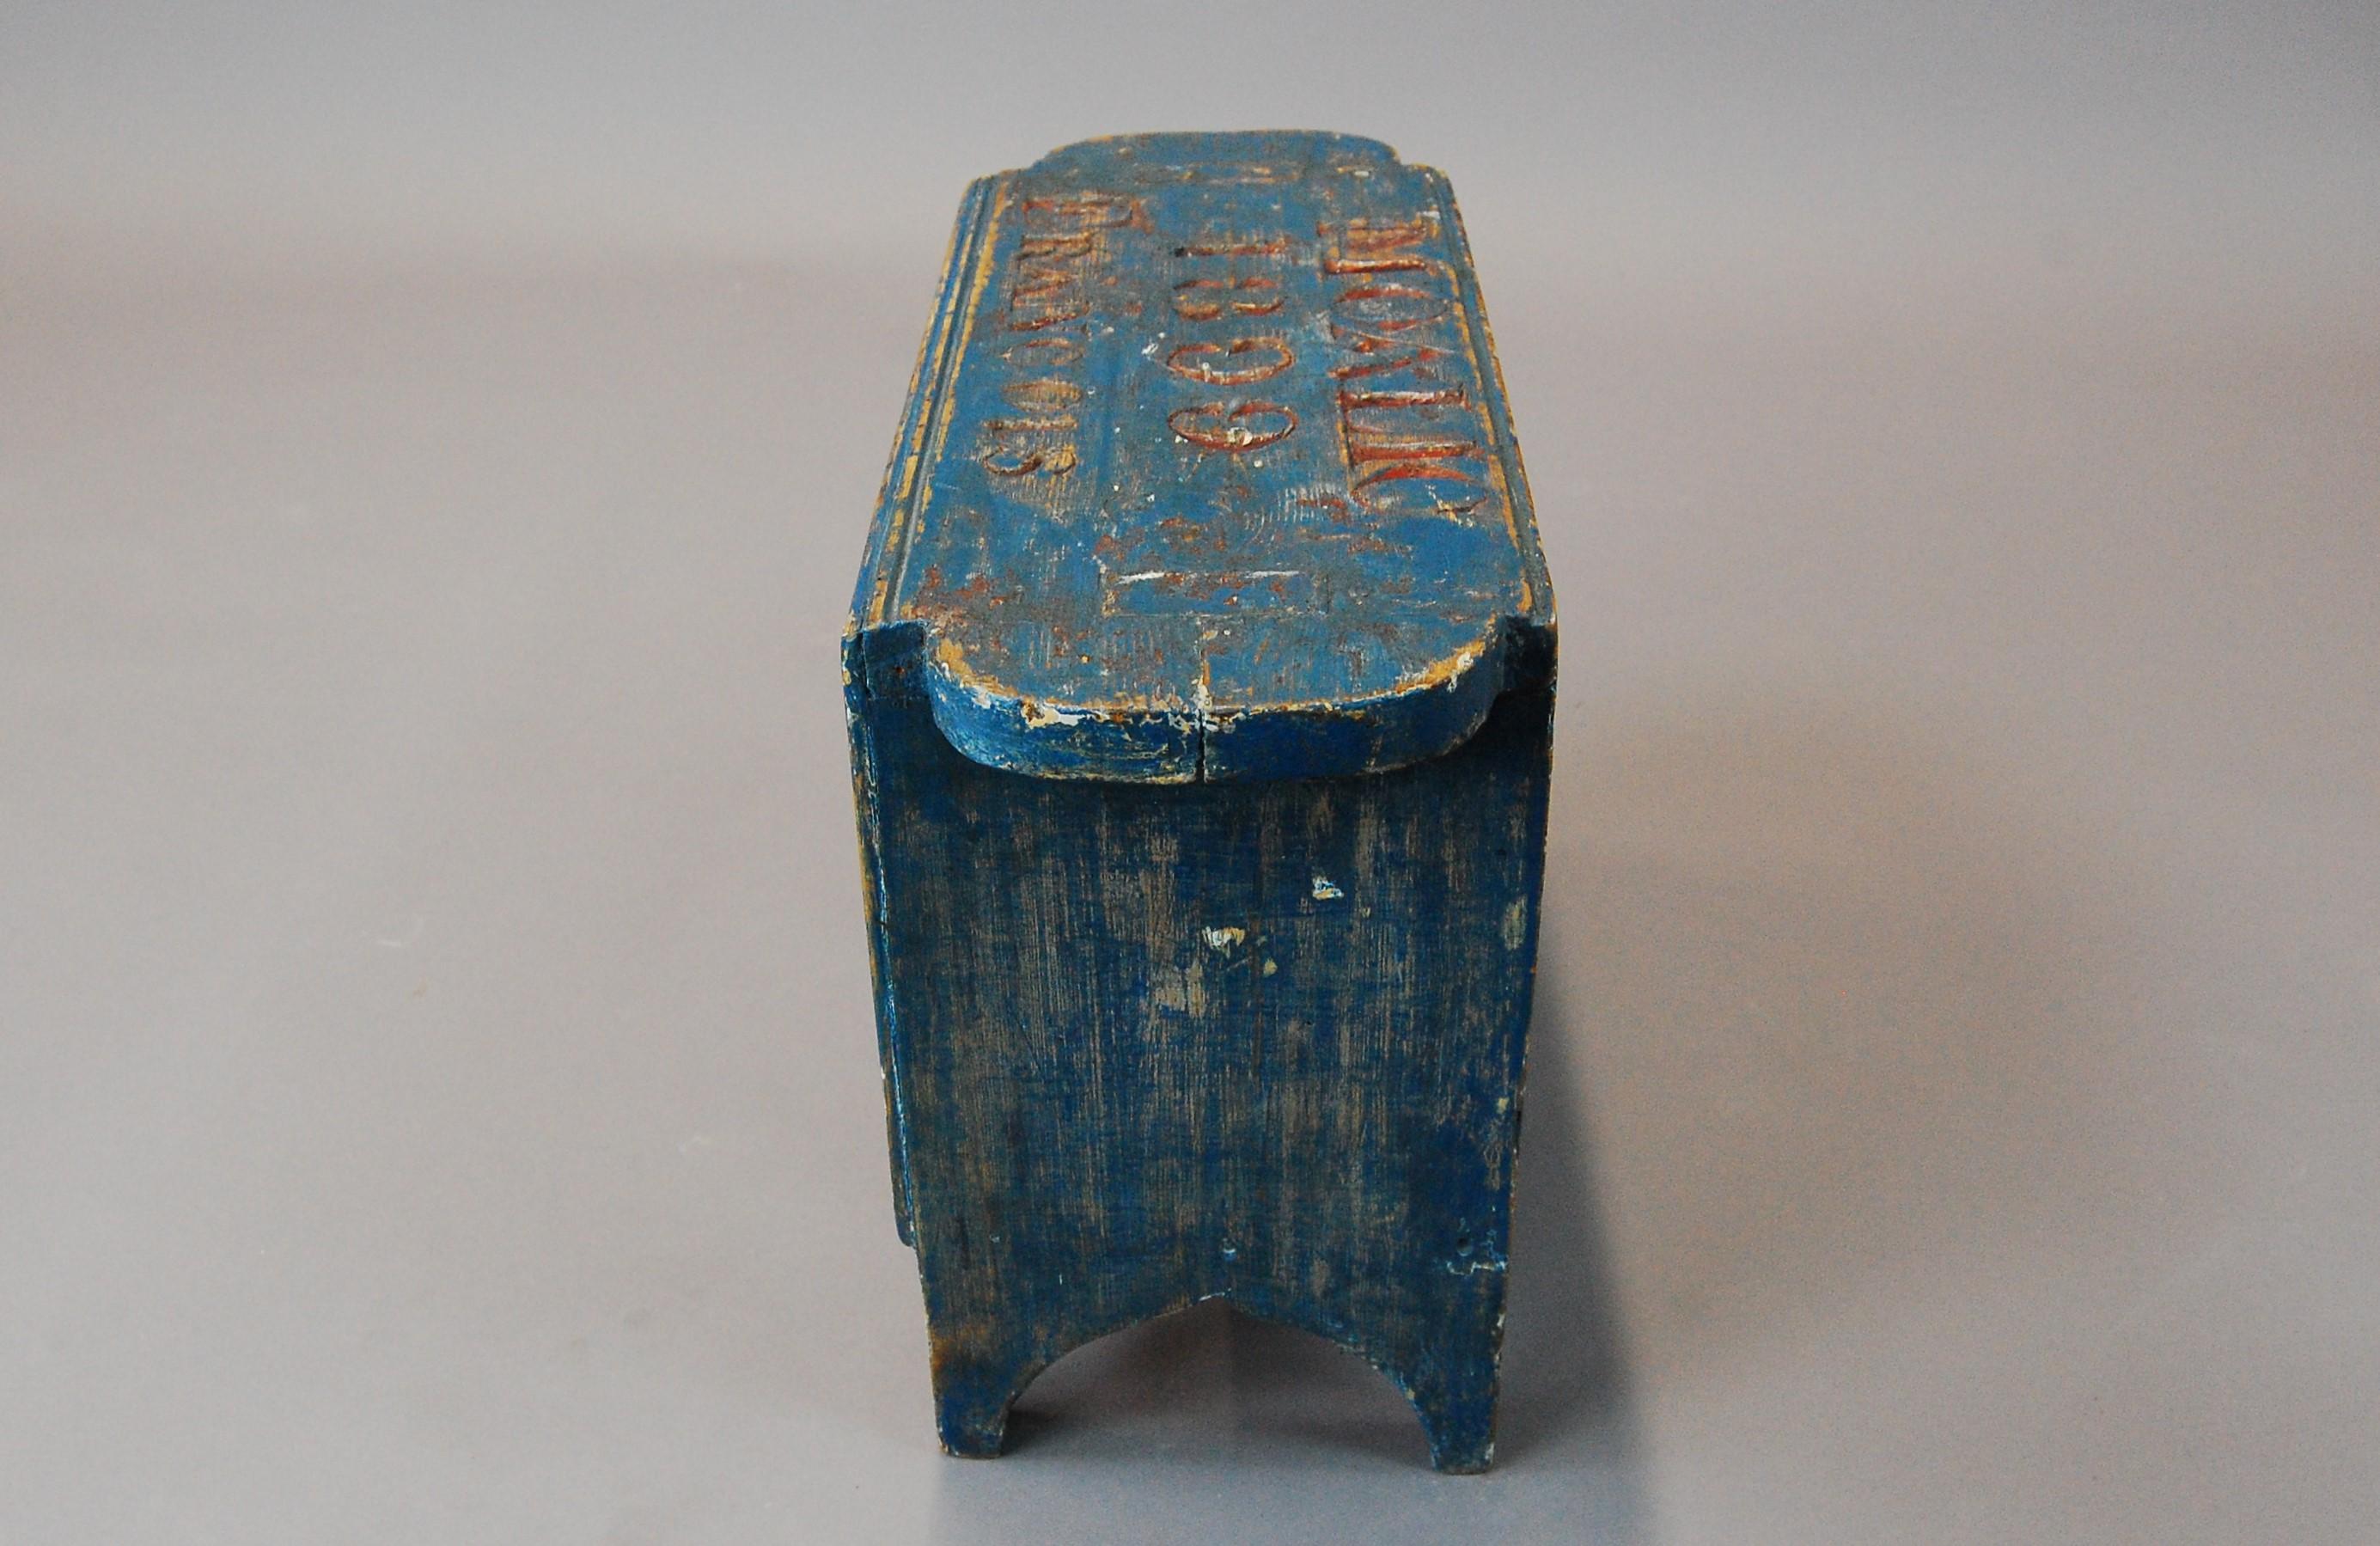 Late 19th century fishermans tacklebox and fishing stool with drawer. The smaller white box, painted and engraved with an anchor as the thumb pinch to slide it open reveals an oversized wood painted fishing lure. The stool is found in its original